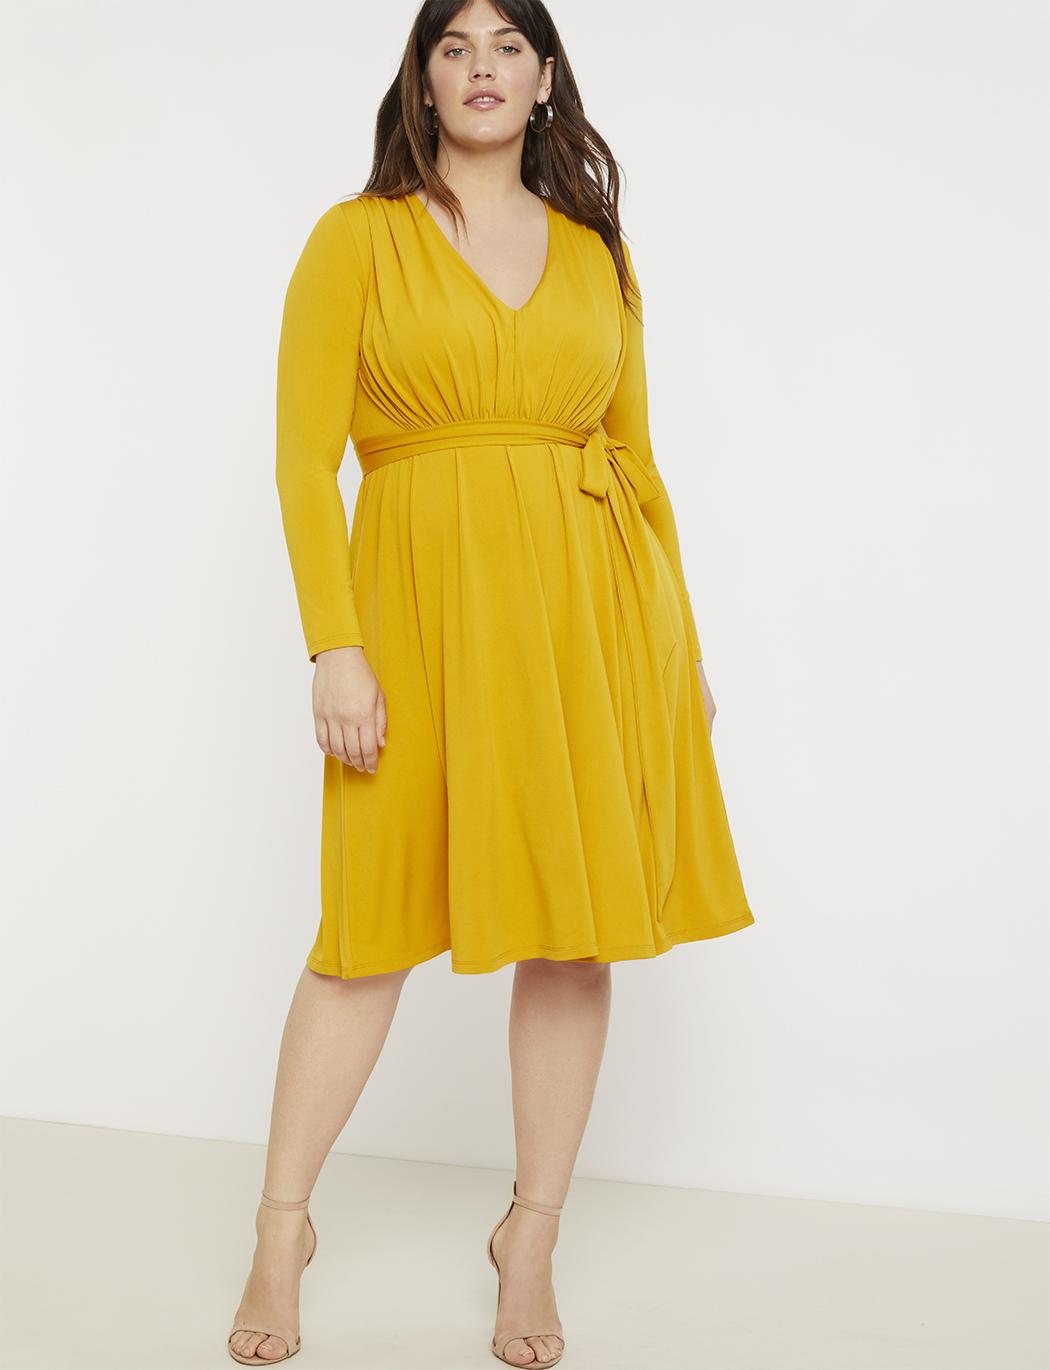 Eloquii Synthetic Gathered Waist V-neck Dress in Yellow - Save 11% - Lyst